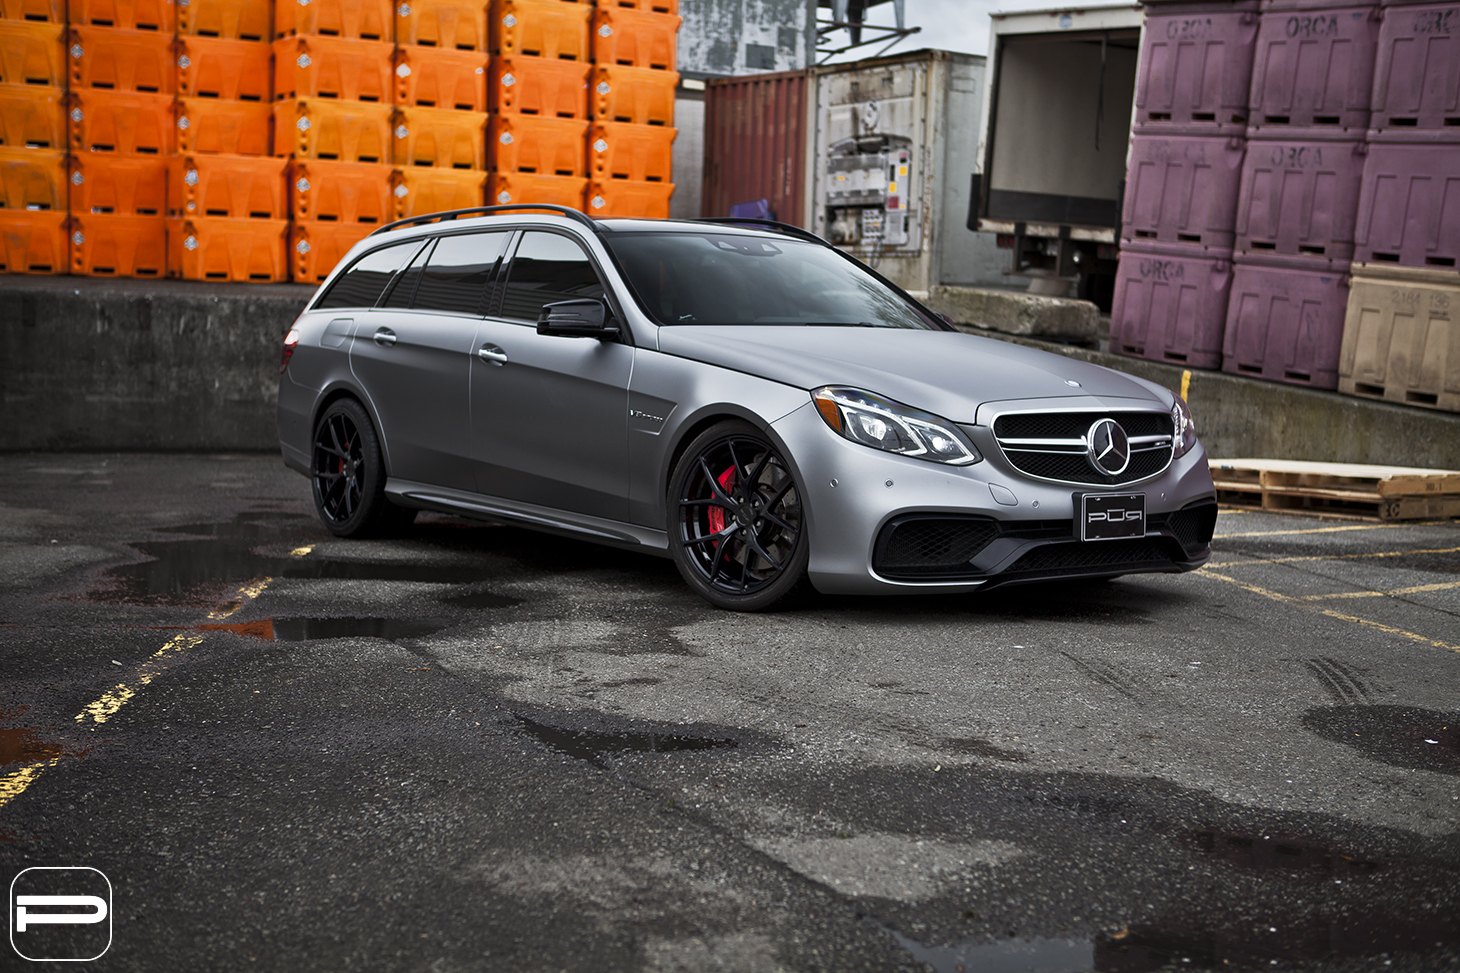 Aftermarket LED Headlights on Gray Mercedes E Class - Photo by PUR Wheels